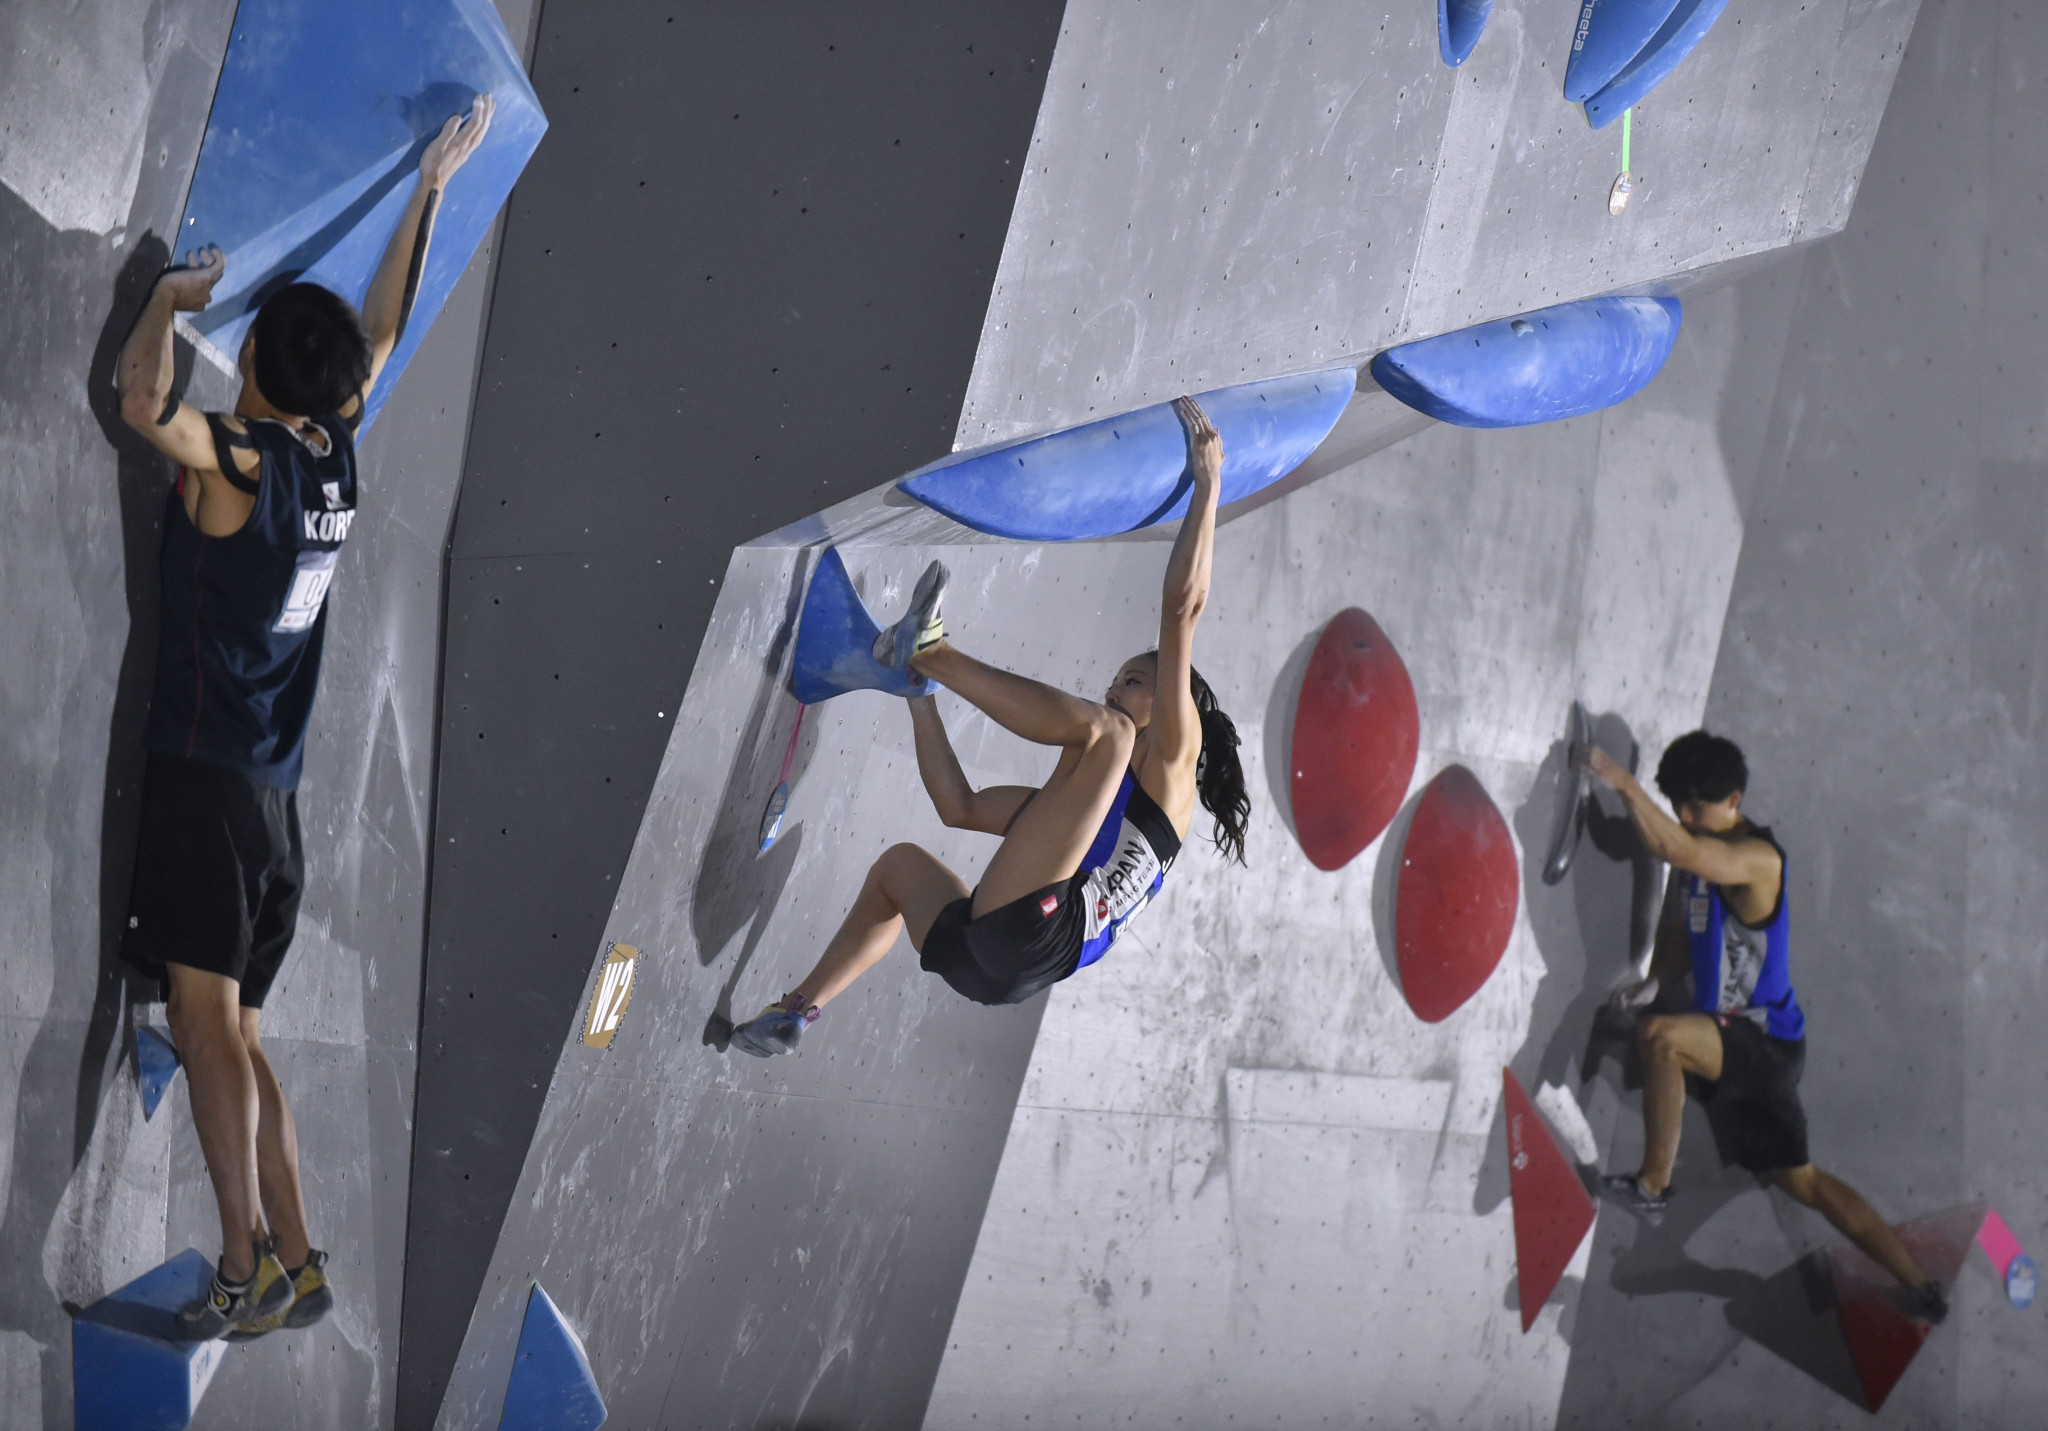 Qualification for the first Olympic sport climbing competitions, as well as gold medals, will be up for grabs at the IFSC World Championships in Japan ©Getty Images